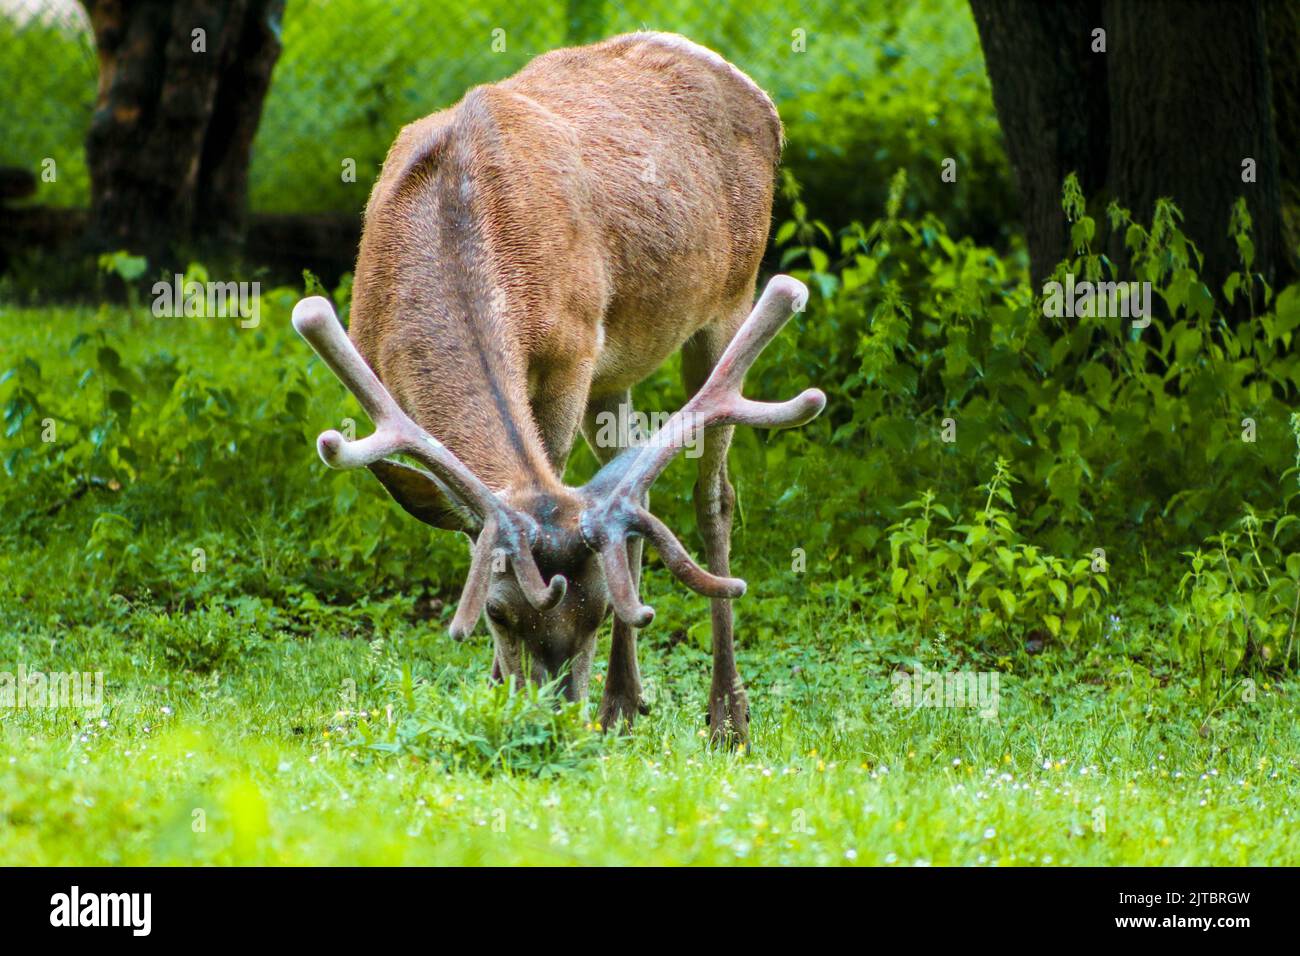 The horned deer are grazing in the meadow and trees, selective focus Stock Photo